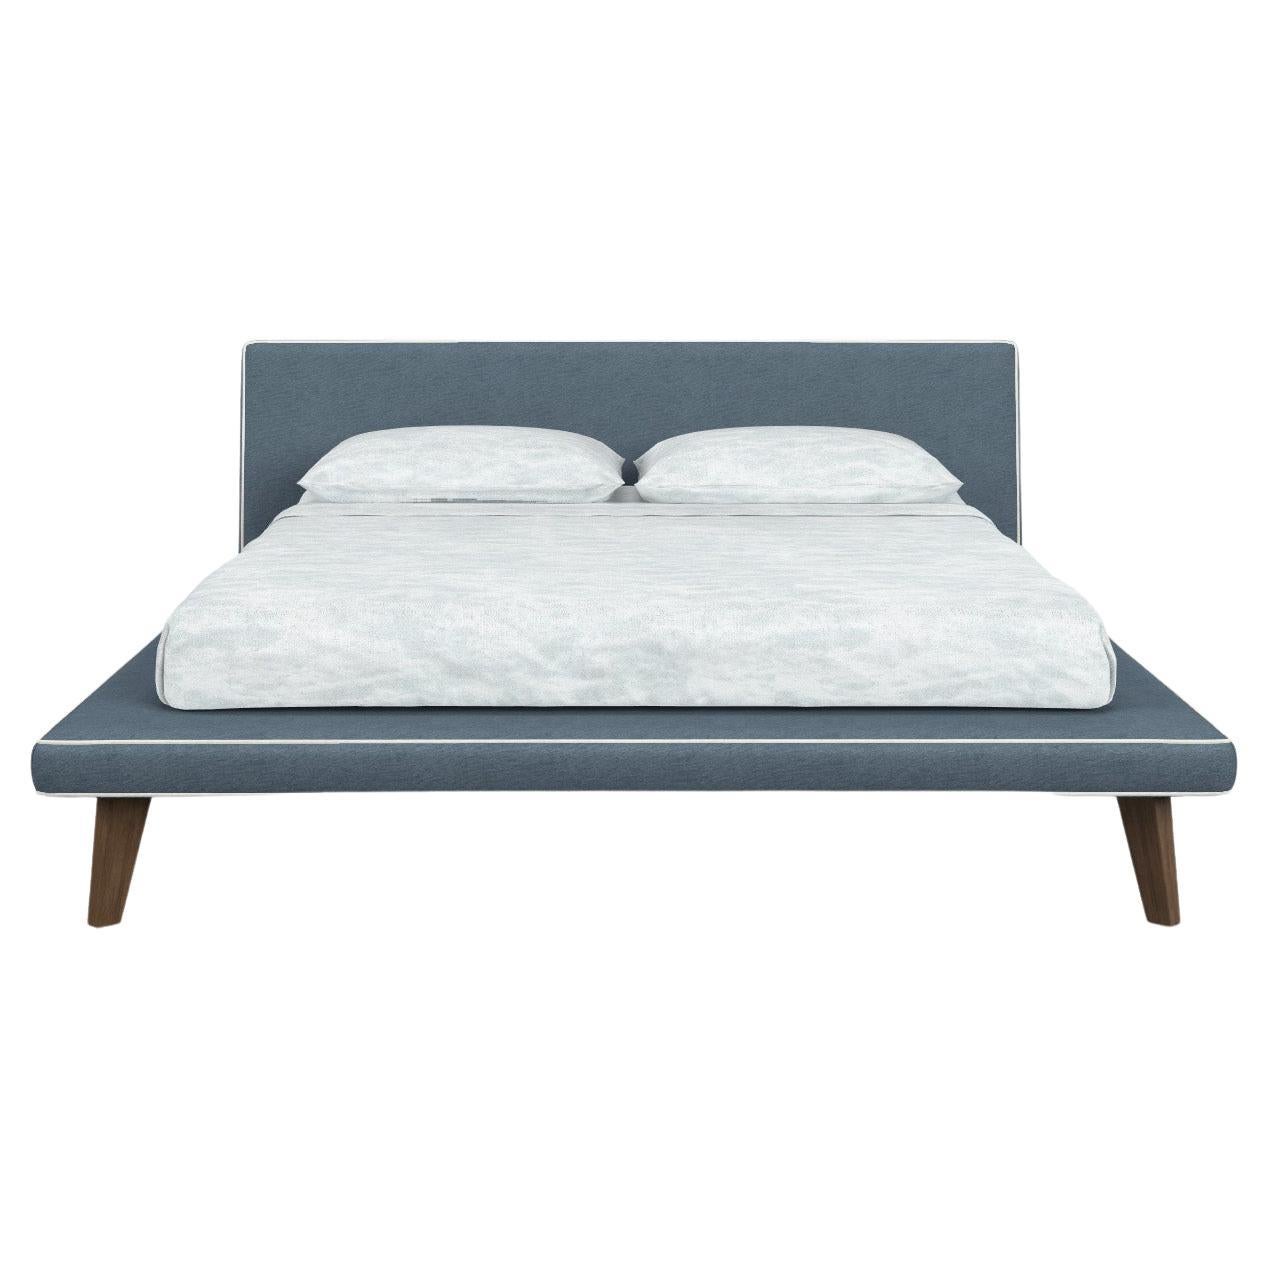 Gervasoni Tray E Bed in Munch Upholstery & Walnut Feet by Paola Navone